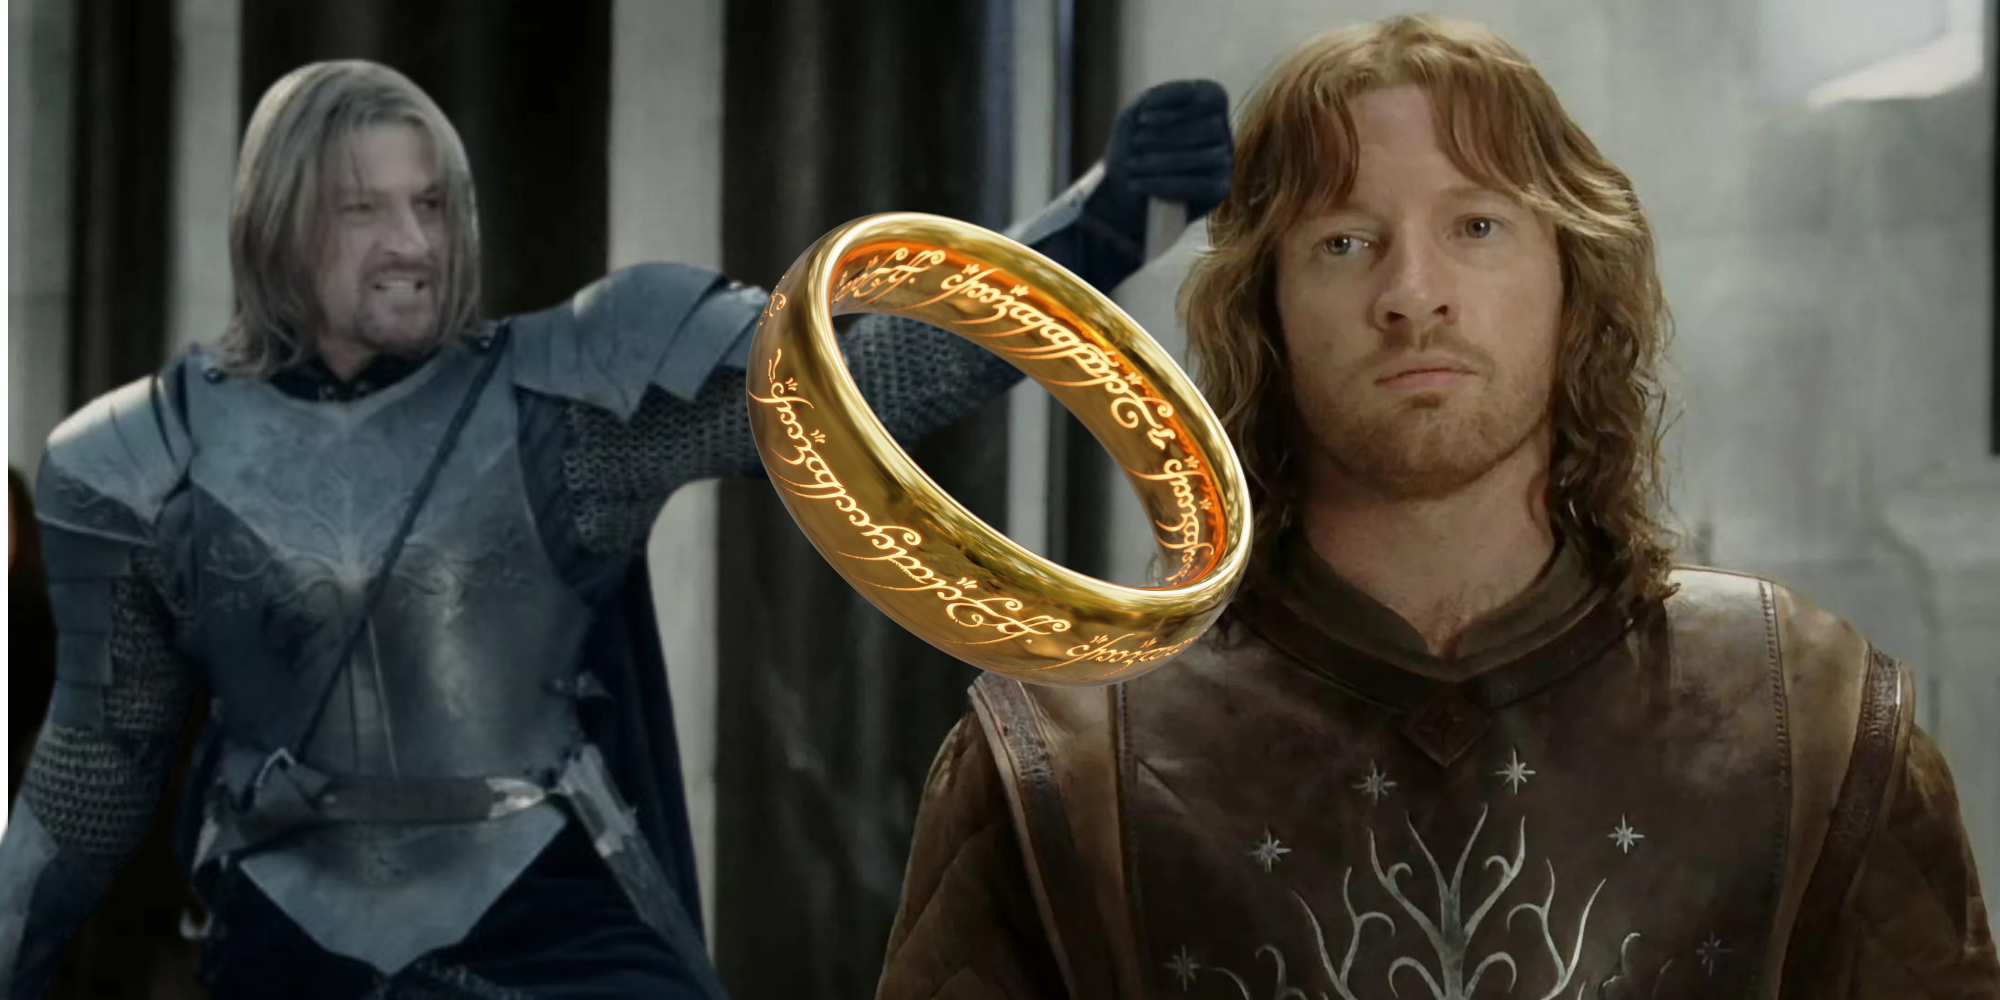 A feature image of Boromir raising his arm and Faramir with the One Ring in the center